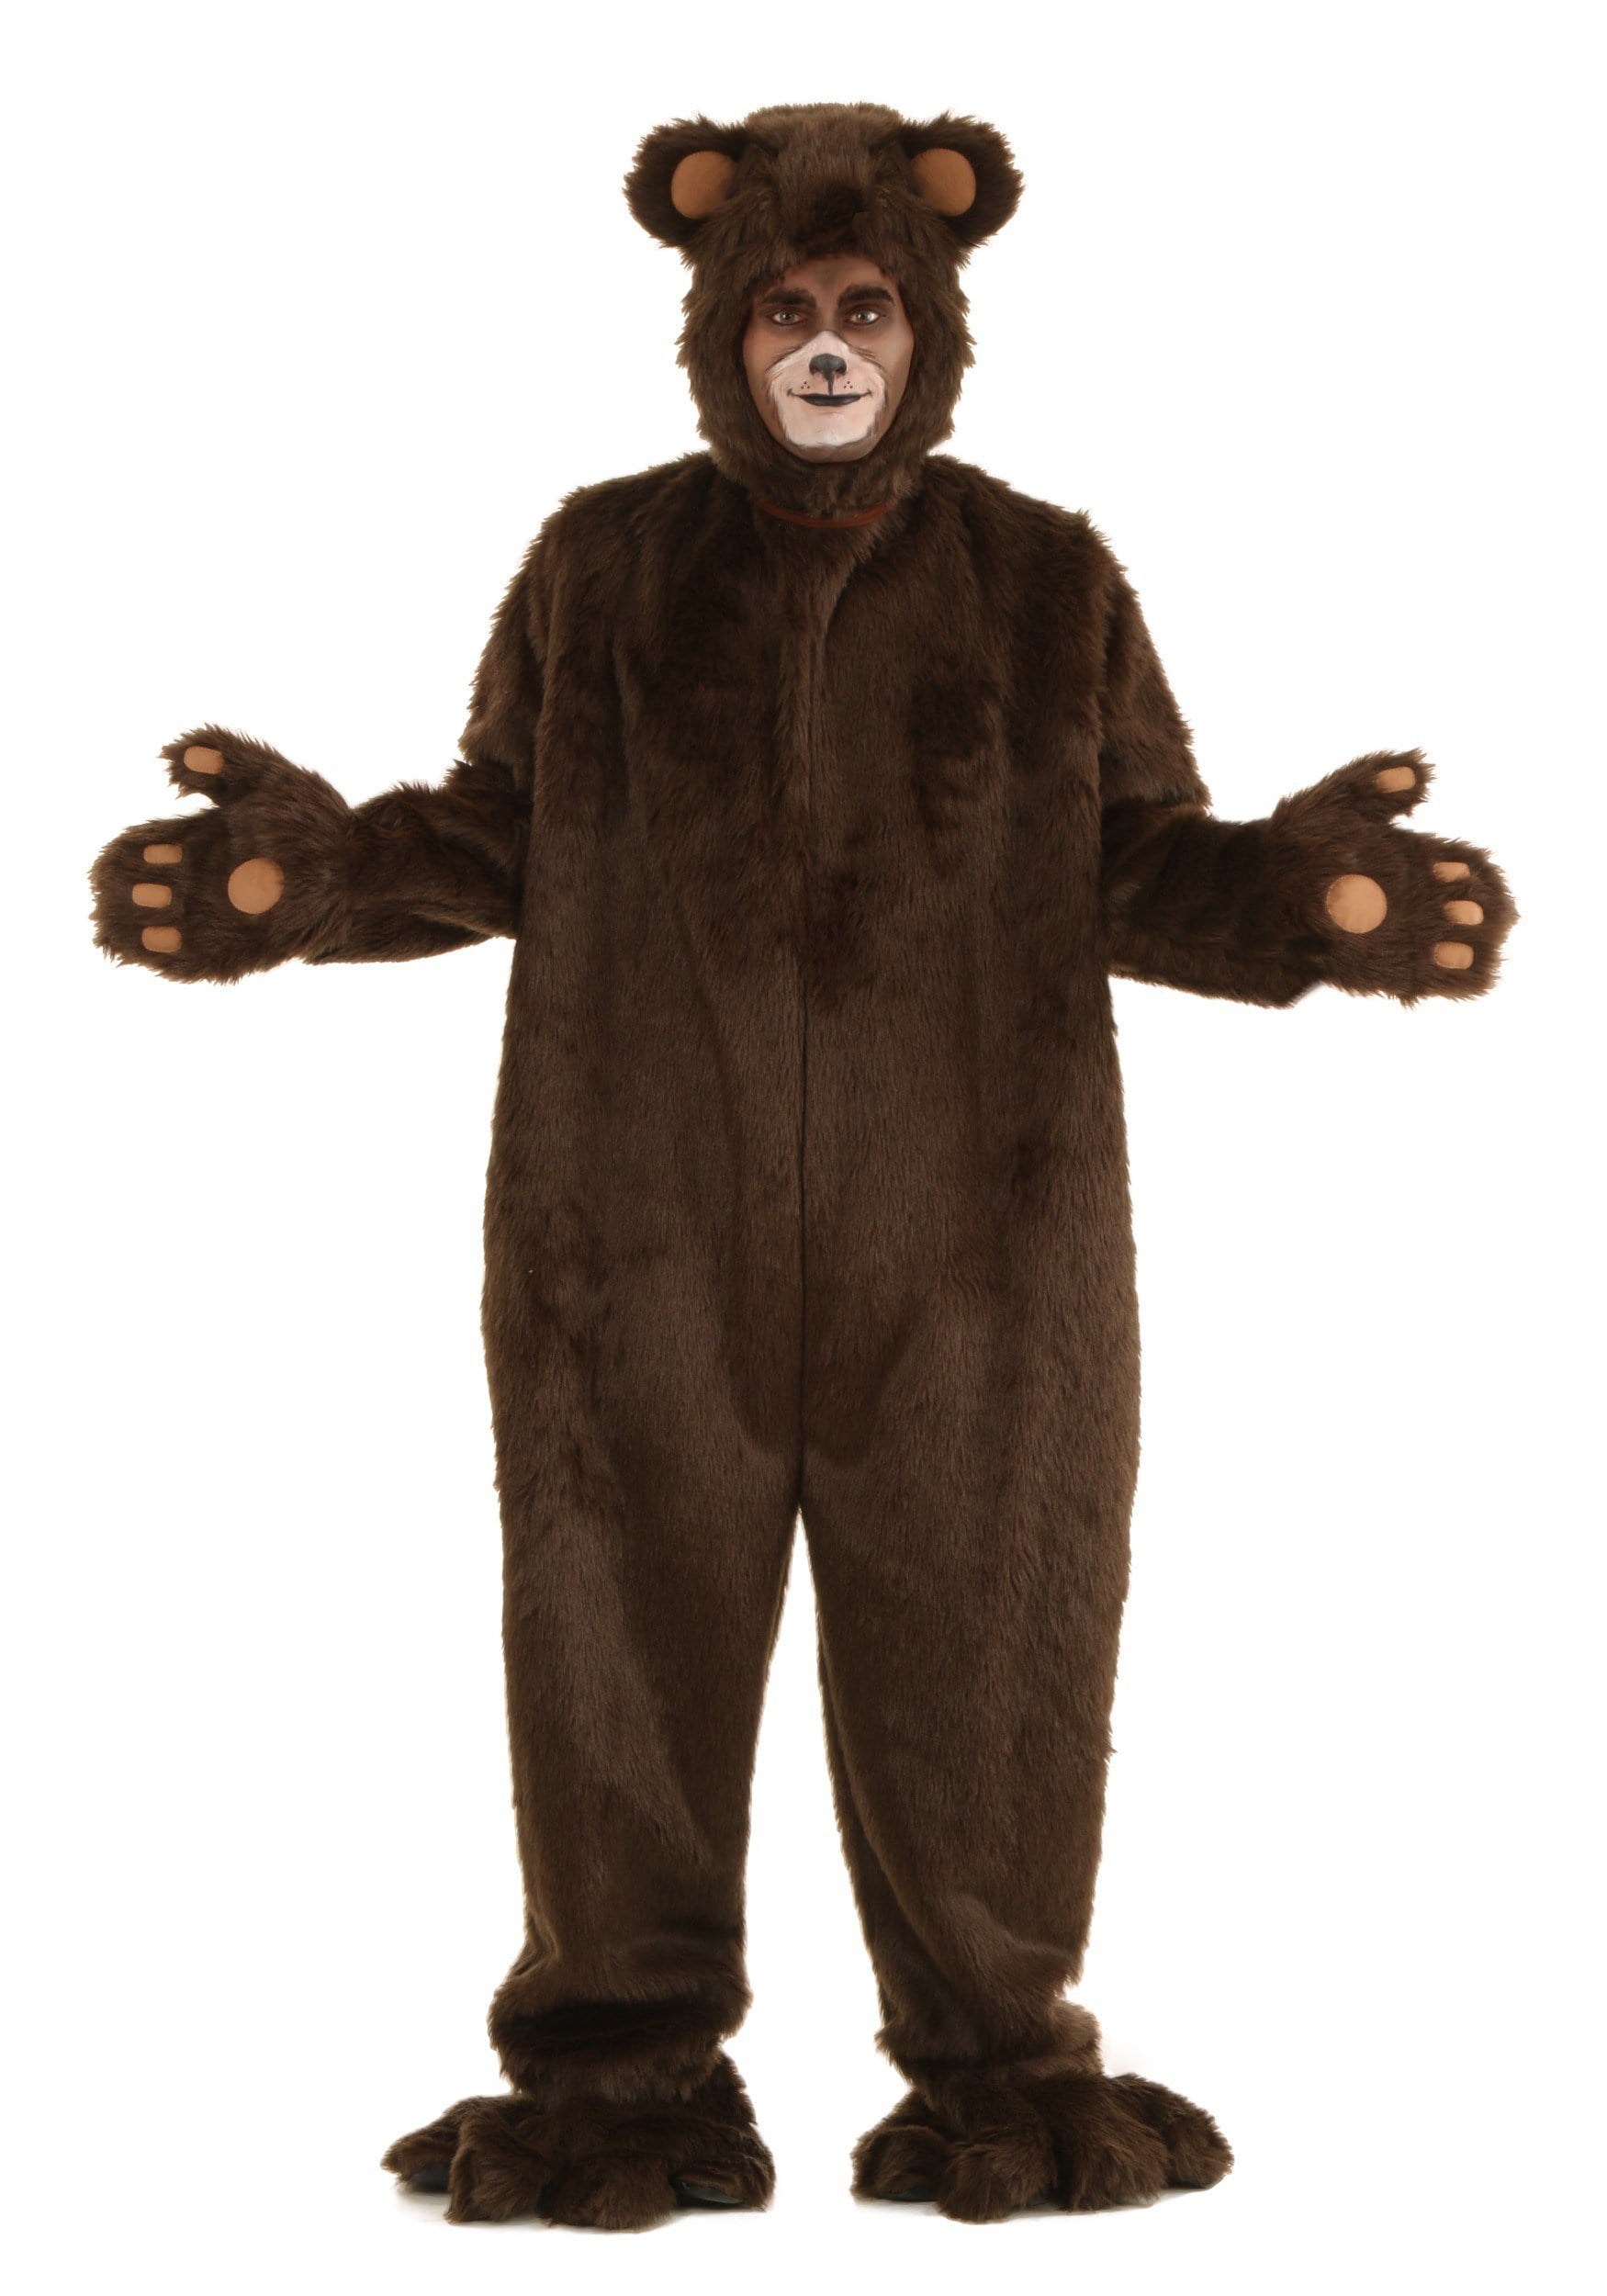 Adult Plus Size Deluxe Furry Brown Bear Costume Walmart Canada